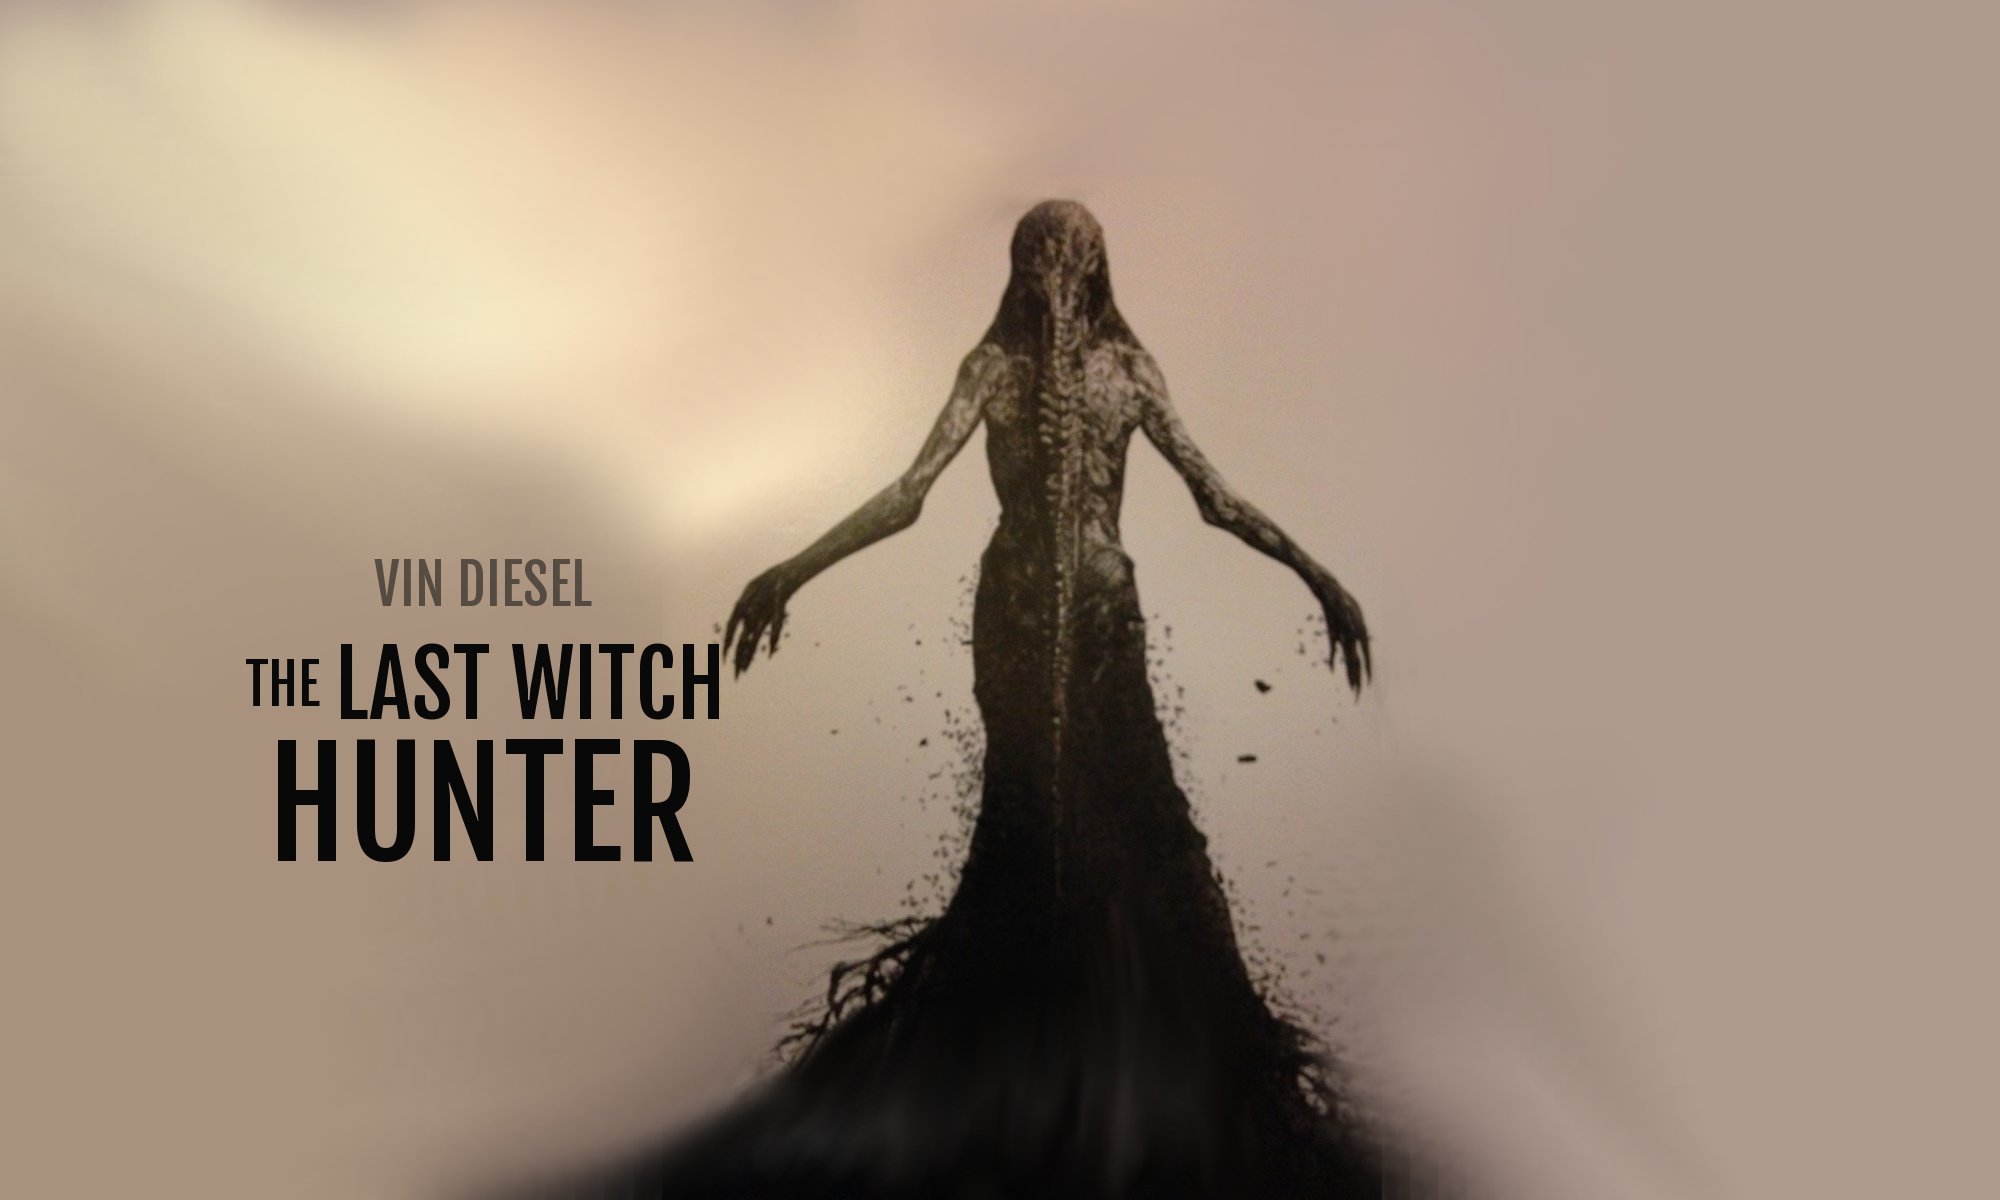 By Stephen Ments Off On The Last Witch Hunter Wallpaper